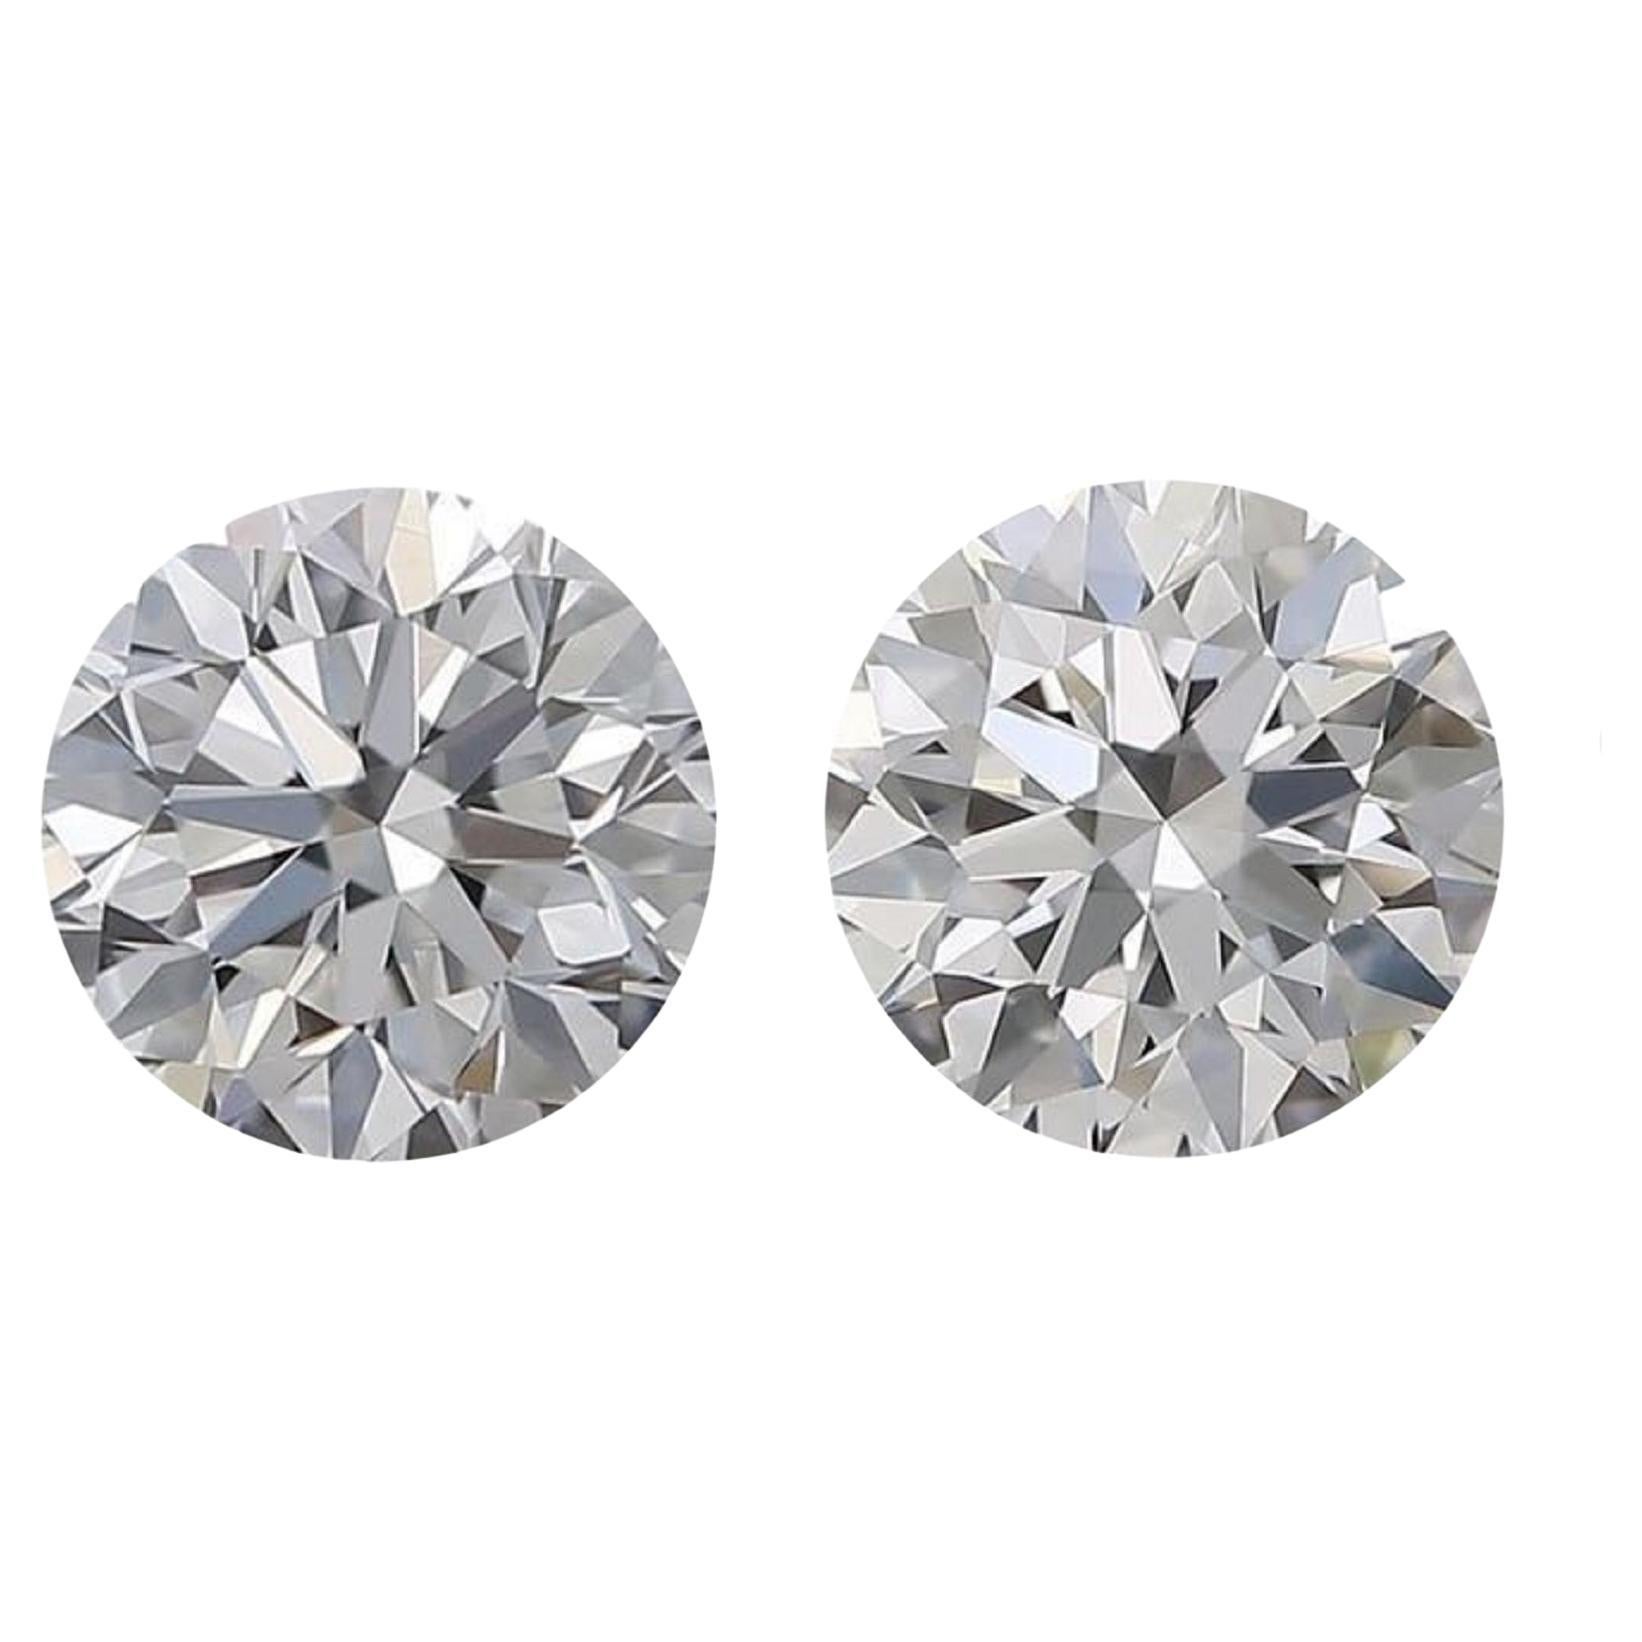 Dazzling 2 pcs Natural Diamonds with 1.06ct Round D VS1 GIA Certificate For Sale